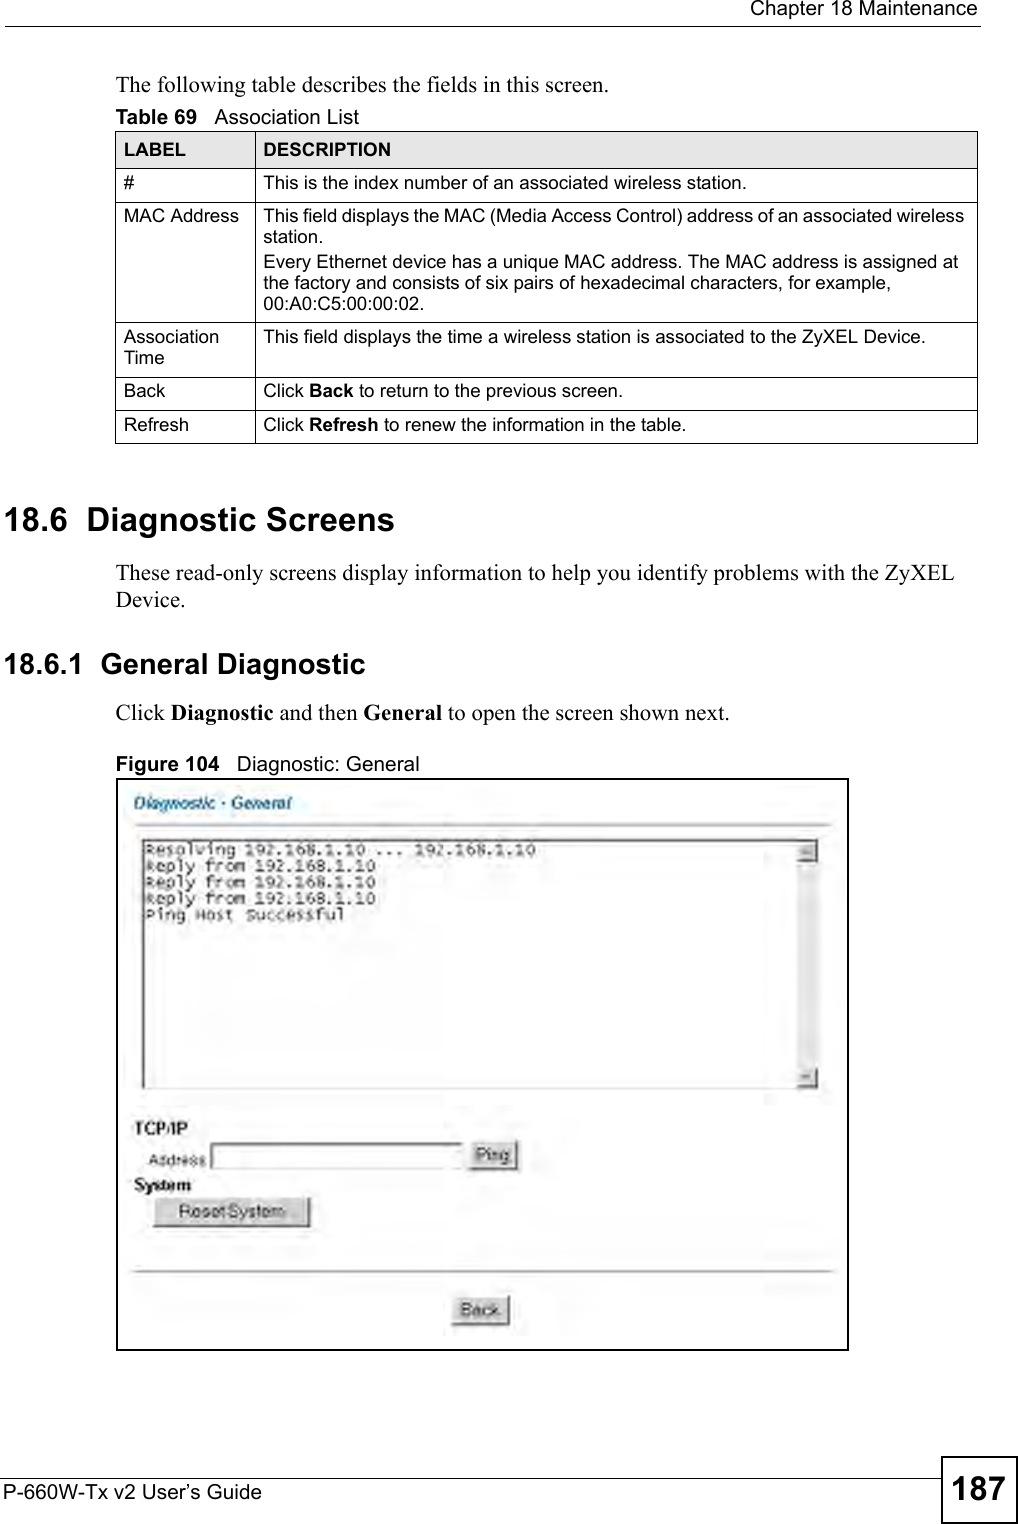  Chapter 18 MaintenanceP-660W-Tx v2 User’s Guide 187The following table describes the fields in this screen.  18.6  Diagnostic Screens These read-only screens display information to help you identify problems with the ZyXEL Device.18.6.1  General Diagnostic     Click Diagnostic and then General to open the screen shown next. Figure 104   Diagnostic: GeneralTable 69   Association ListLABEL DESCRIPTION#This is the index number of an associated wireless station.MAC Address  This field displays the MAC (Media Access Control) address of an associated wireless station.Every Ethernet device has a unique MAC address. The MAC address is assigned at the factory and consists of six pairs of hexadecimal characters, for example, 00:A0:C5:00:00:02.Association TimeThis field displays the time a wireless station is associated to the ZyXEL Device. Back  Click Back to return to the previous screen.Refresh Click Refresh to renew the information in the table.